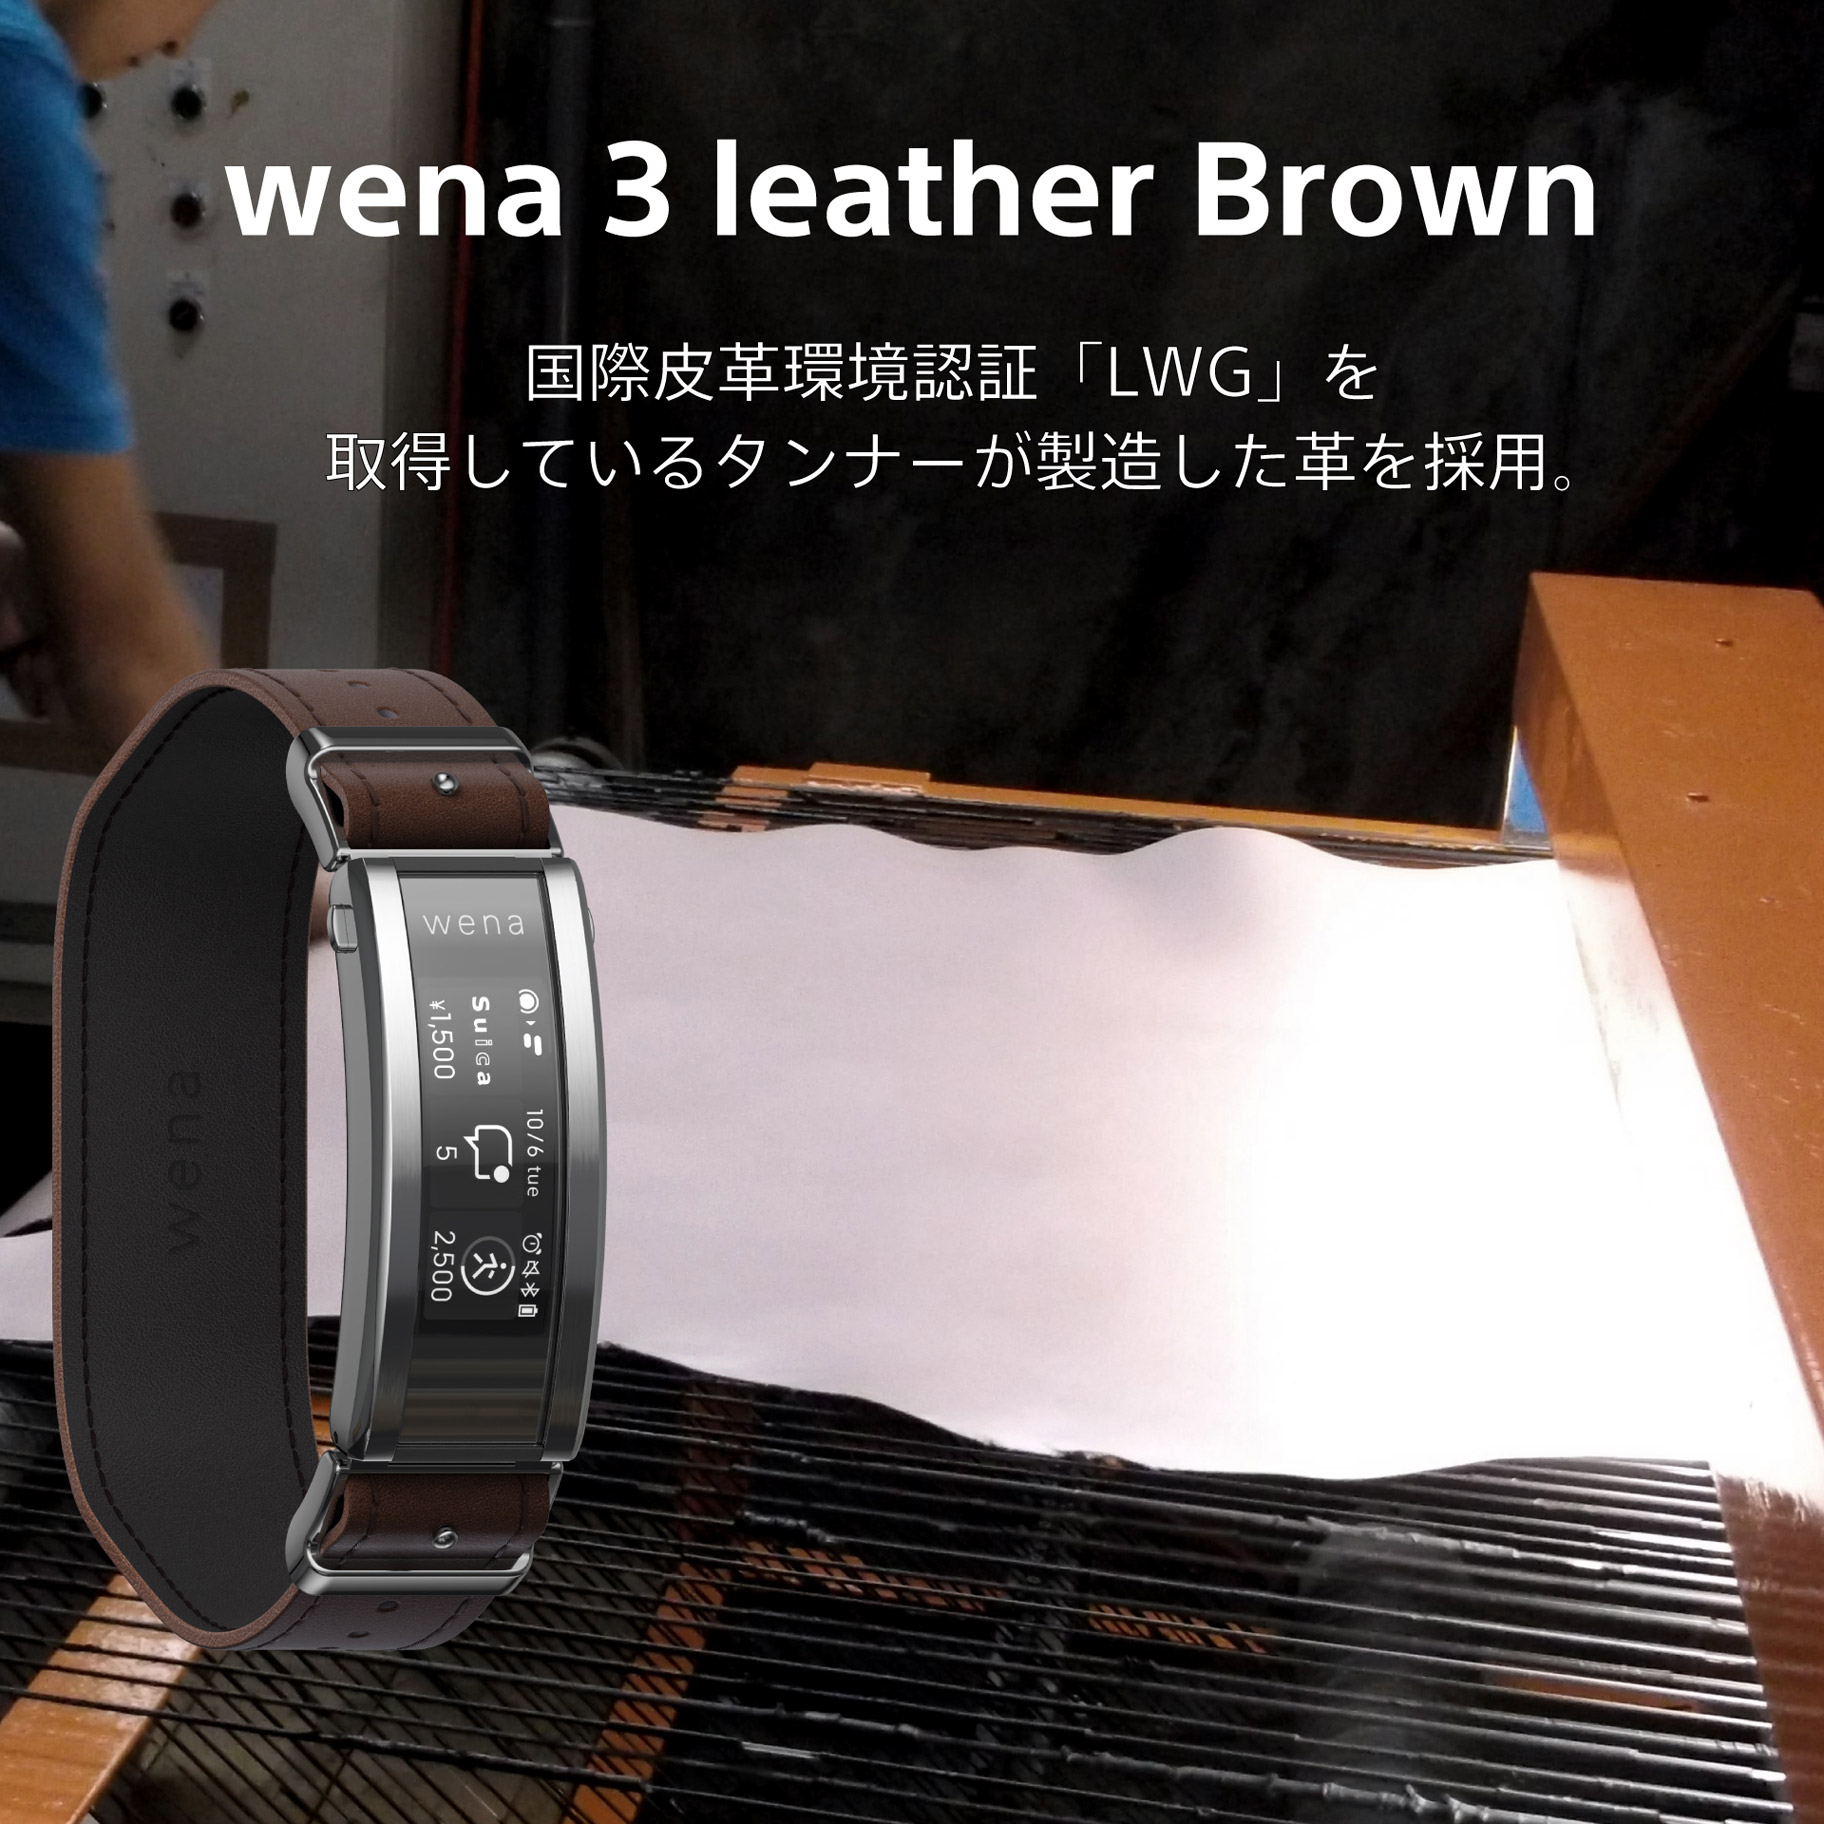 【Suica対応】wena 3 leather Brown ブラウン WNW-C21A/T